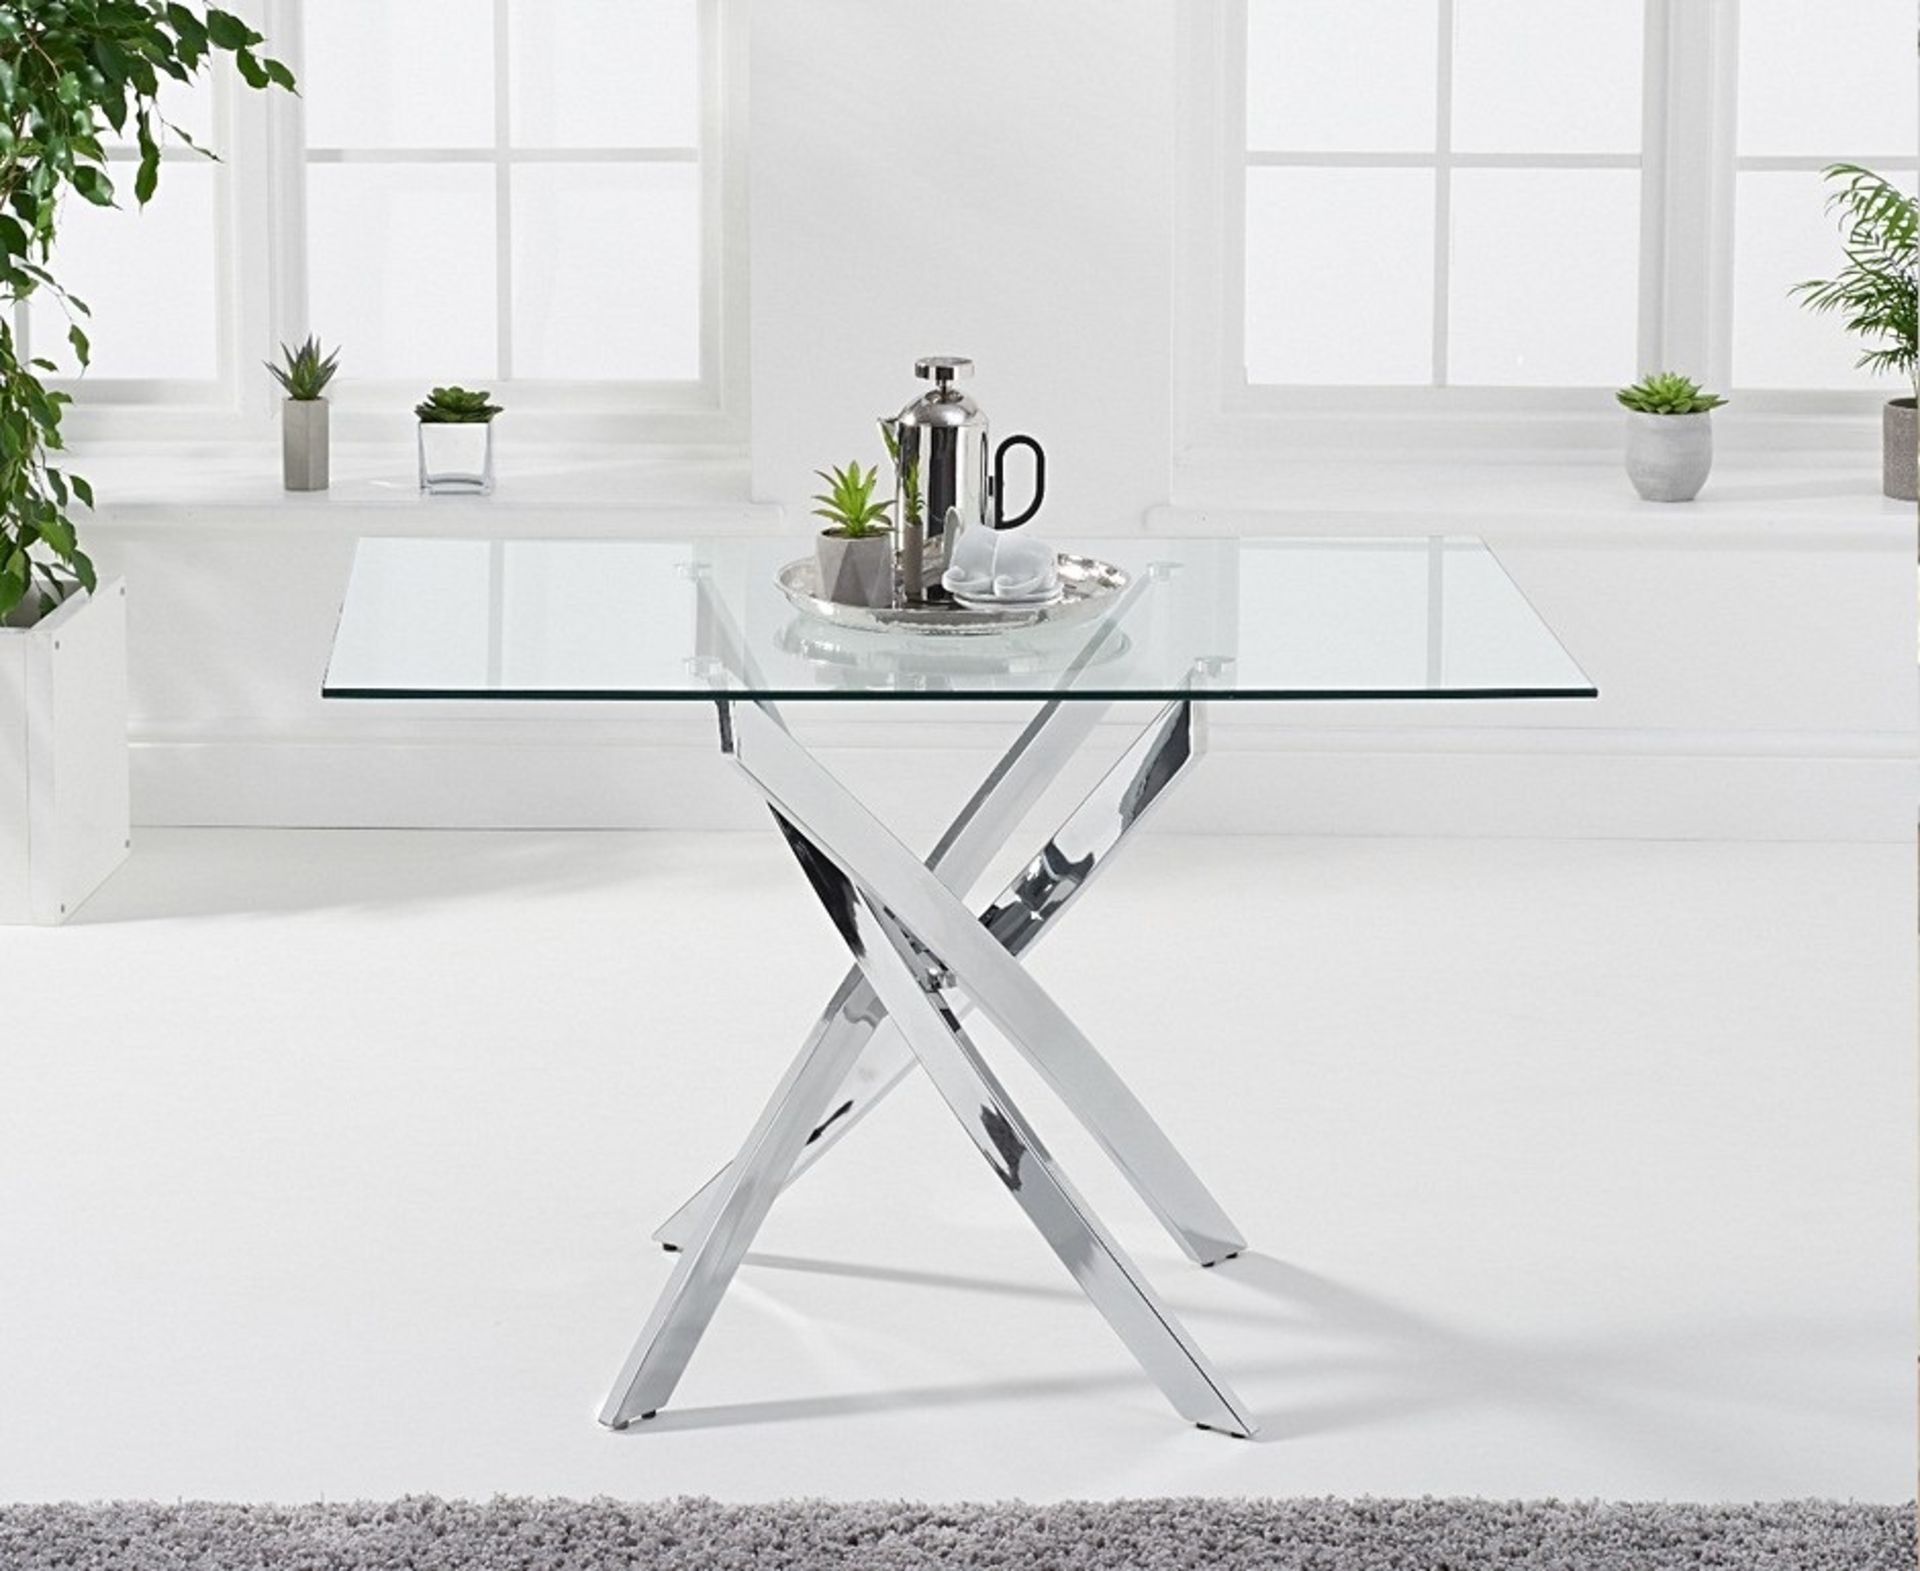 Denver 120cm Rectangular Glass Dining Table The Denver collection of tables is distinguished by